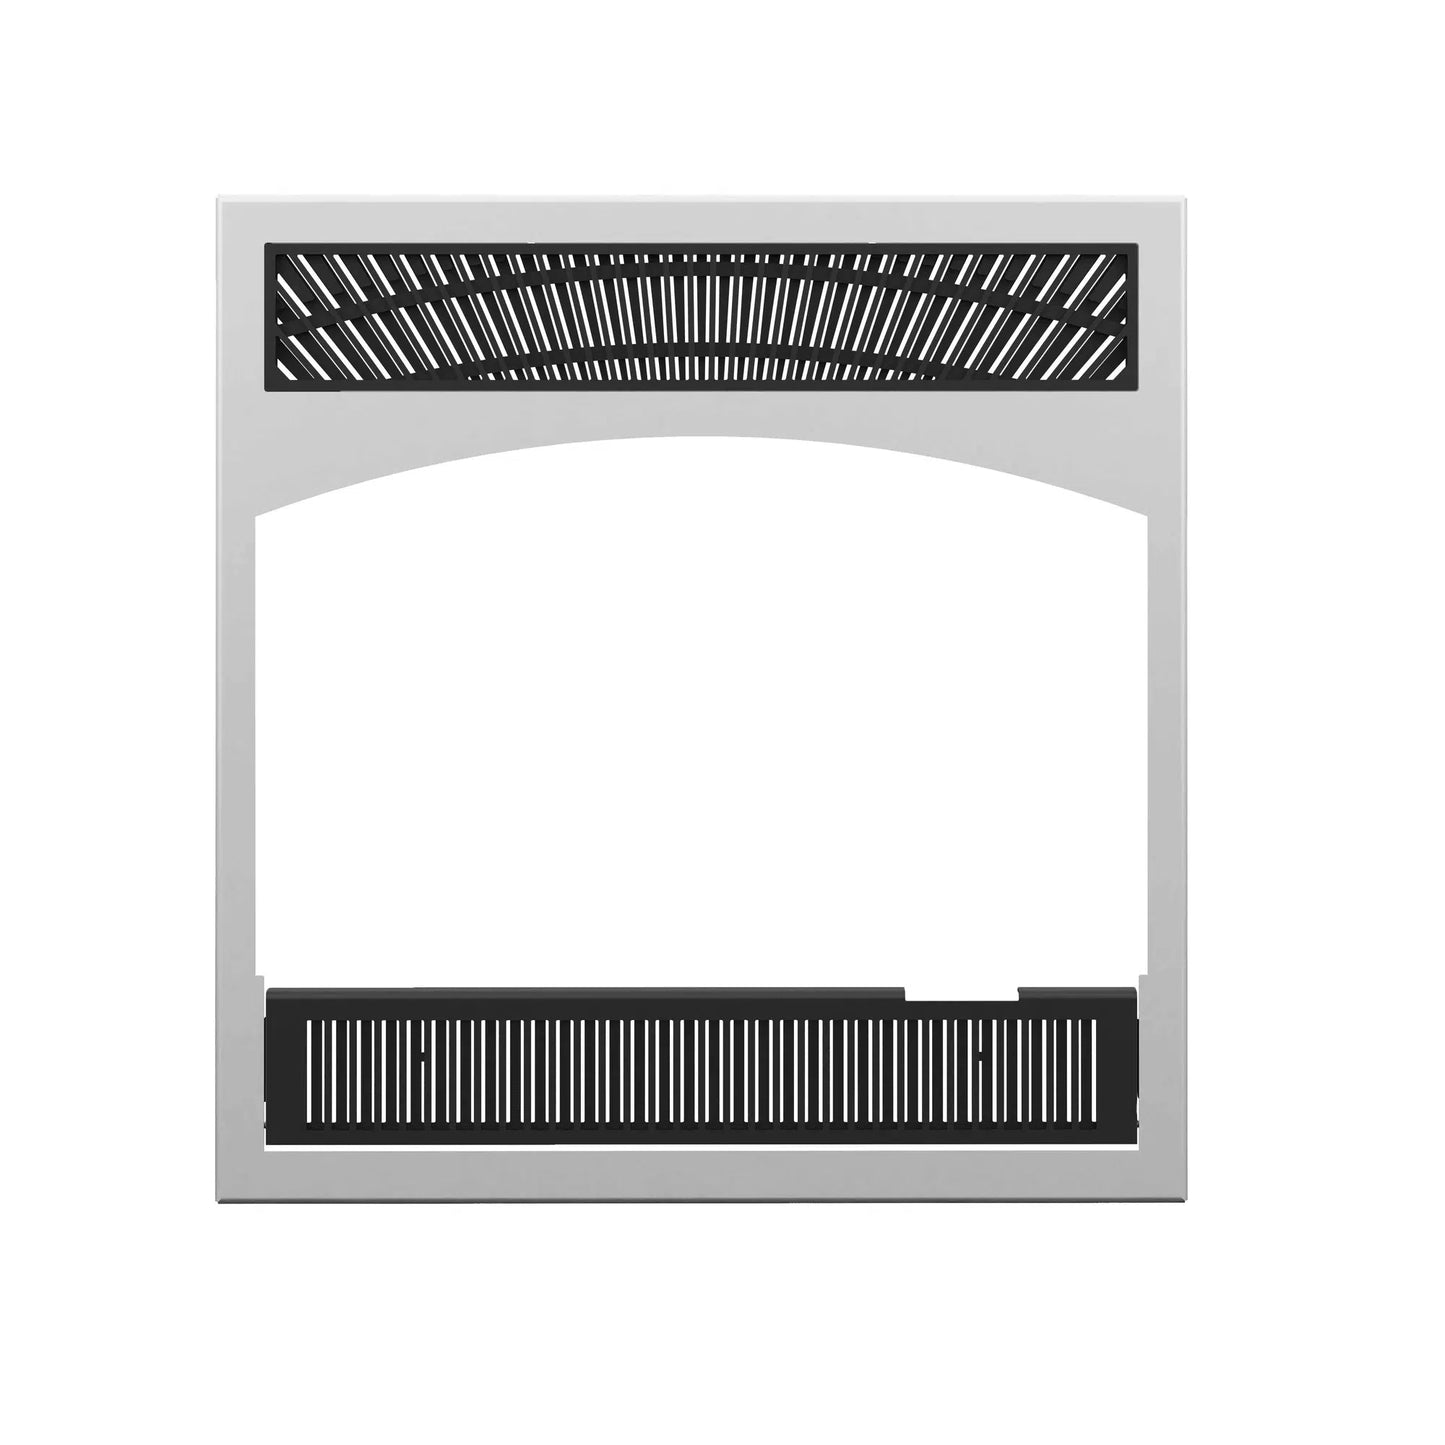 Enerzone Rustic Style Louvers for Solution 2.5 ZC II Wood Fireplace